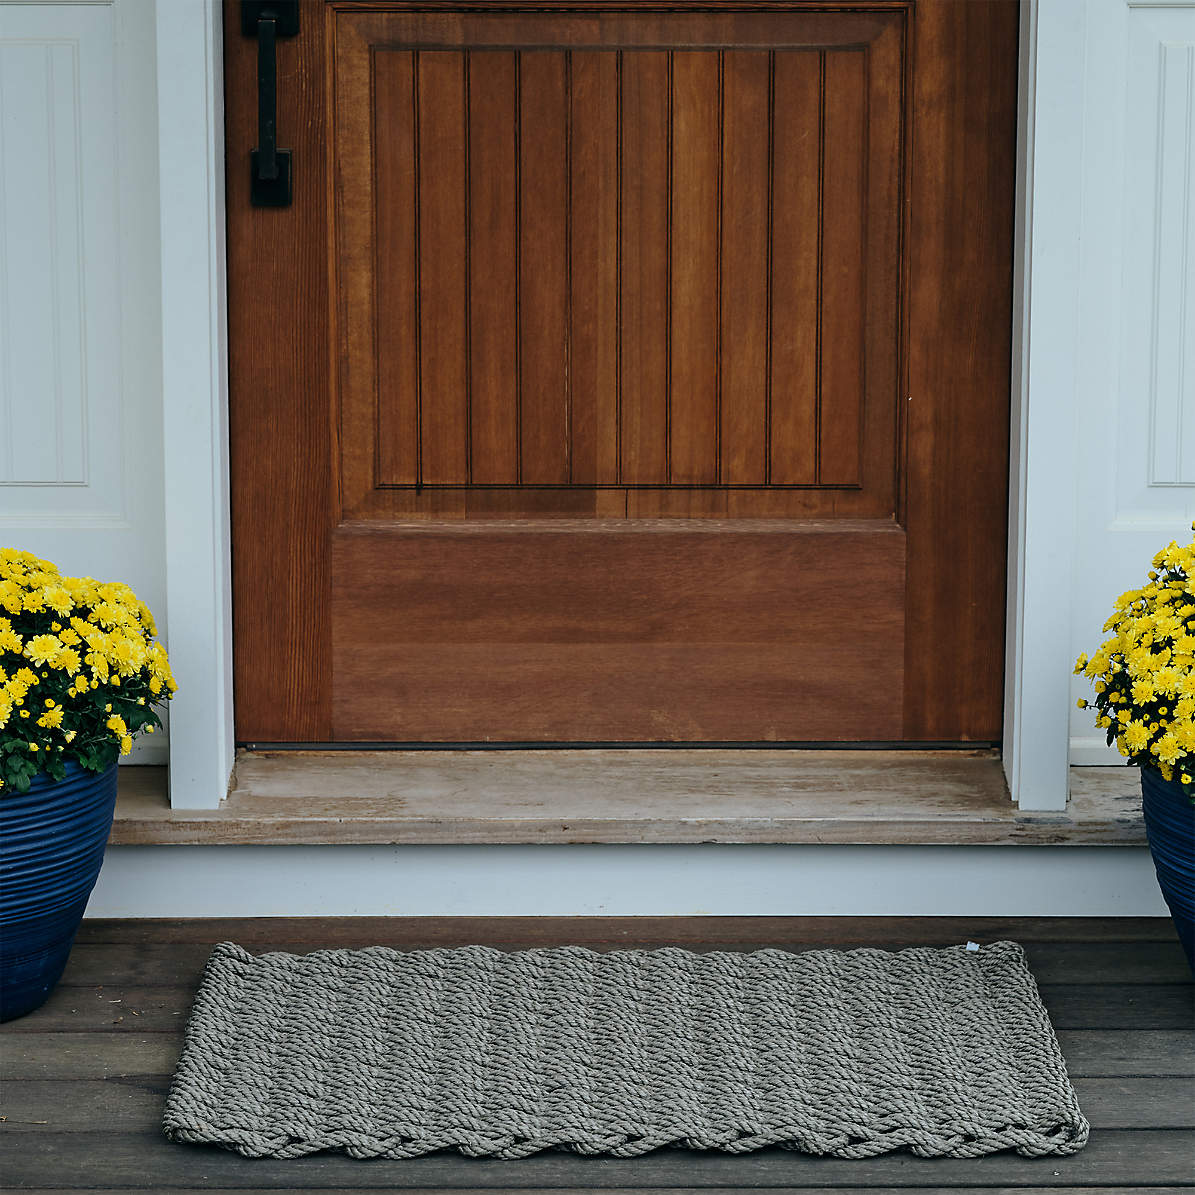 The Rope Co. Braided Rope Doormat - 24 x 38, Sand & Navy